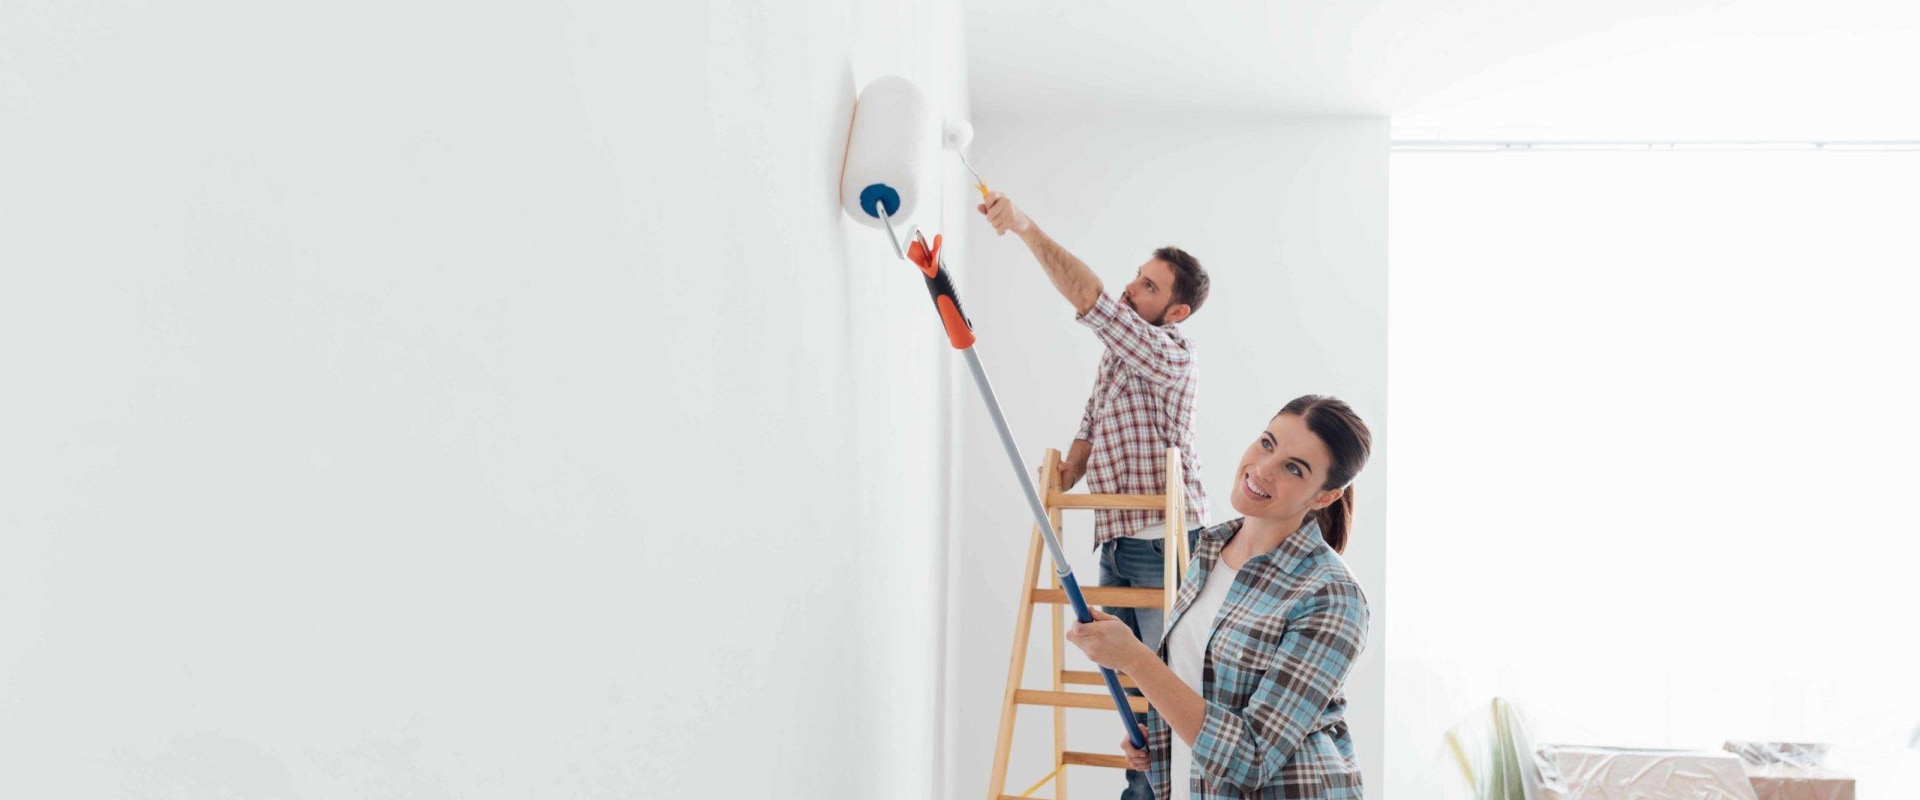 Painting Services in Your Area - Costs and More